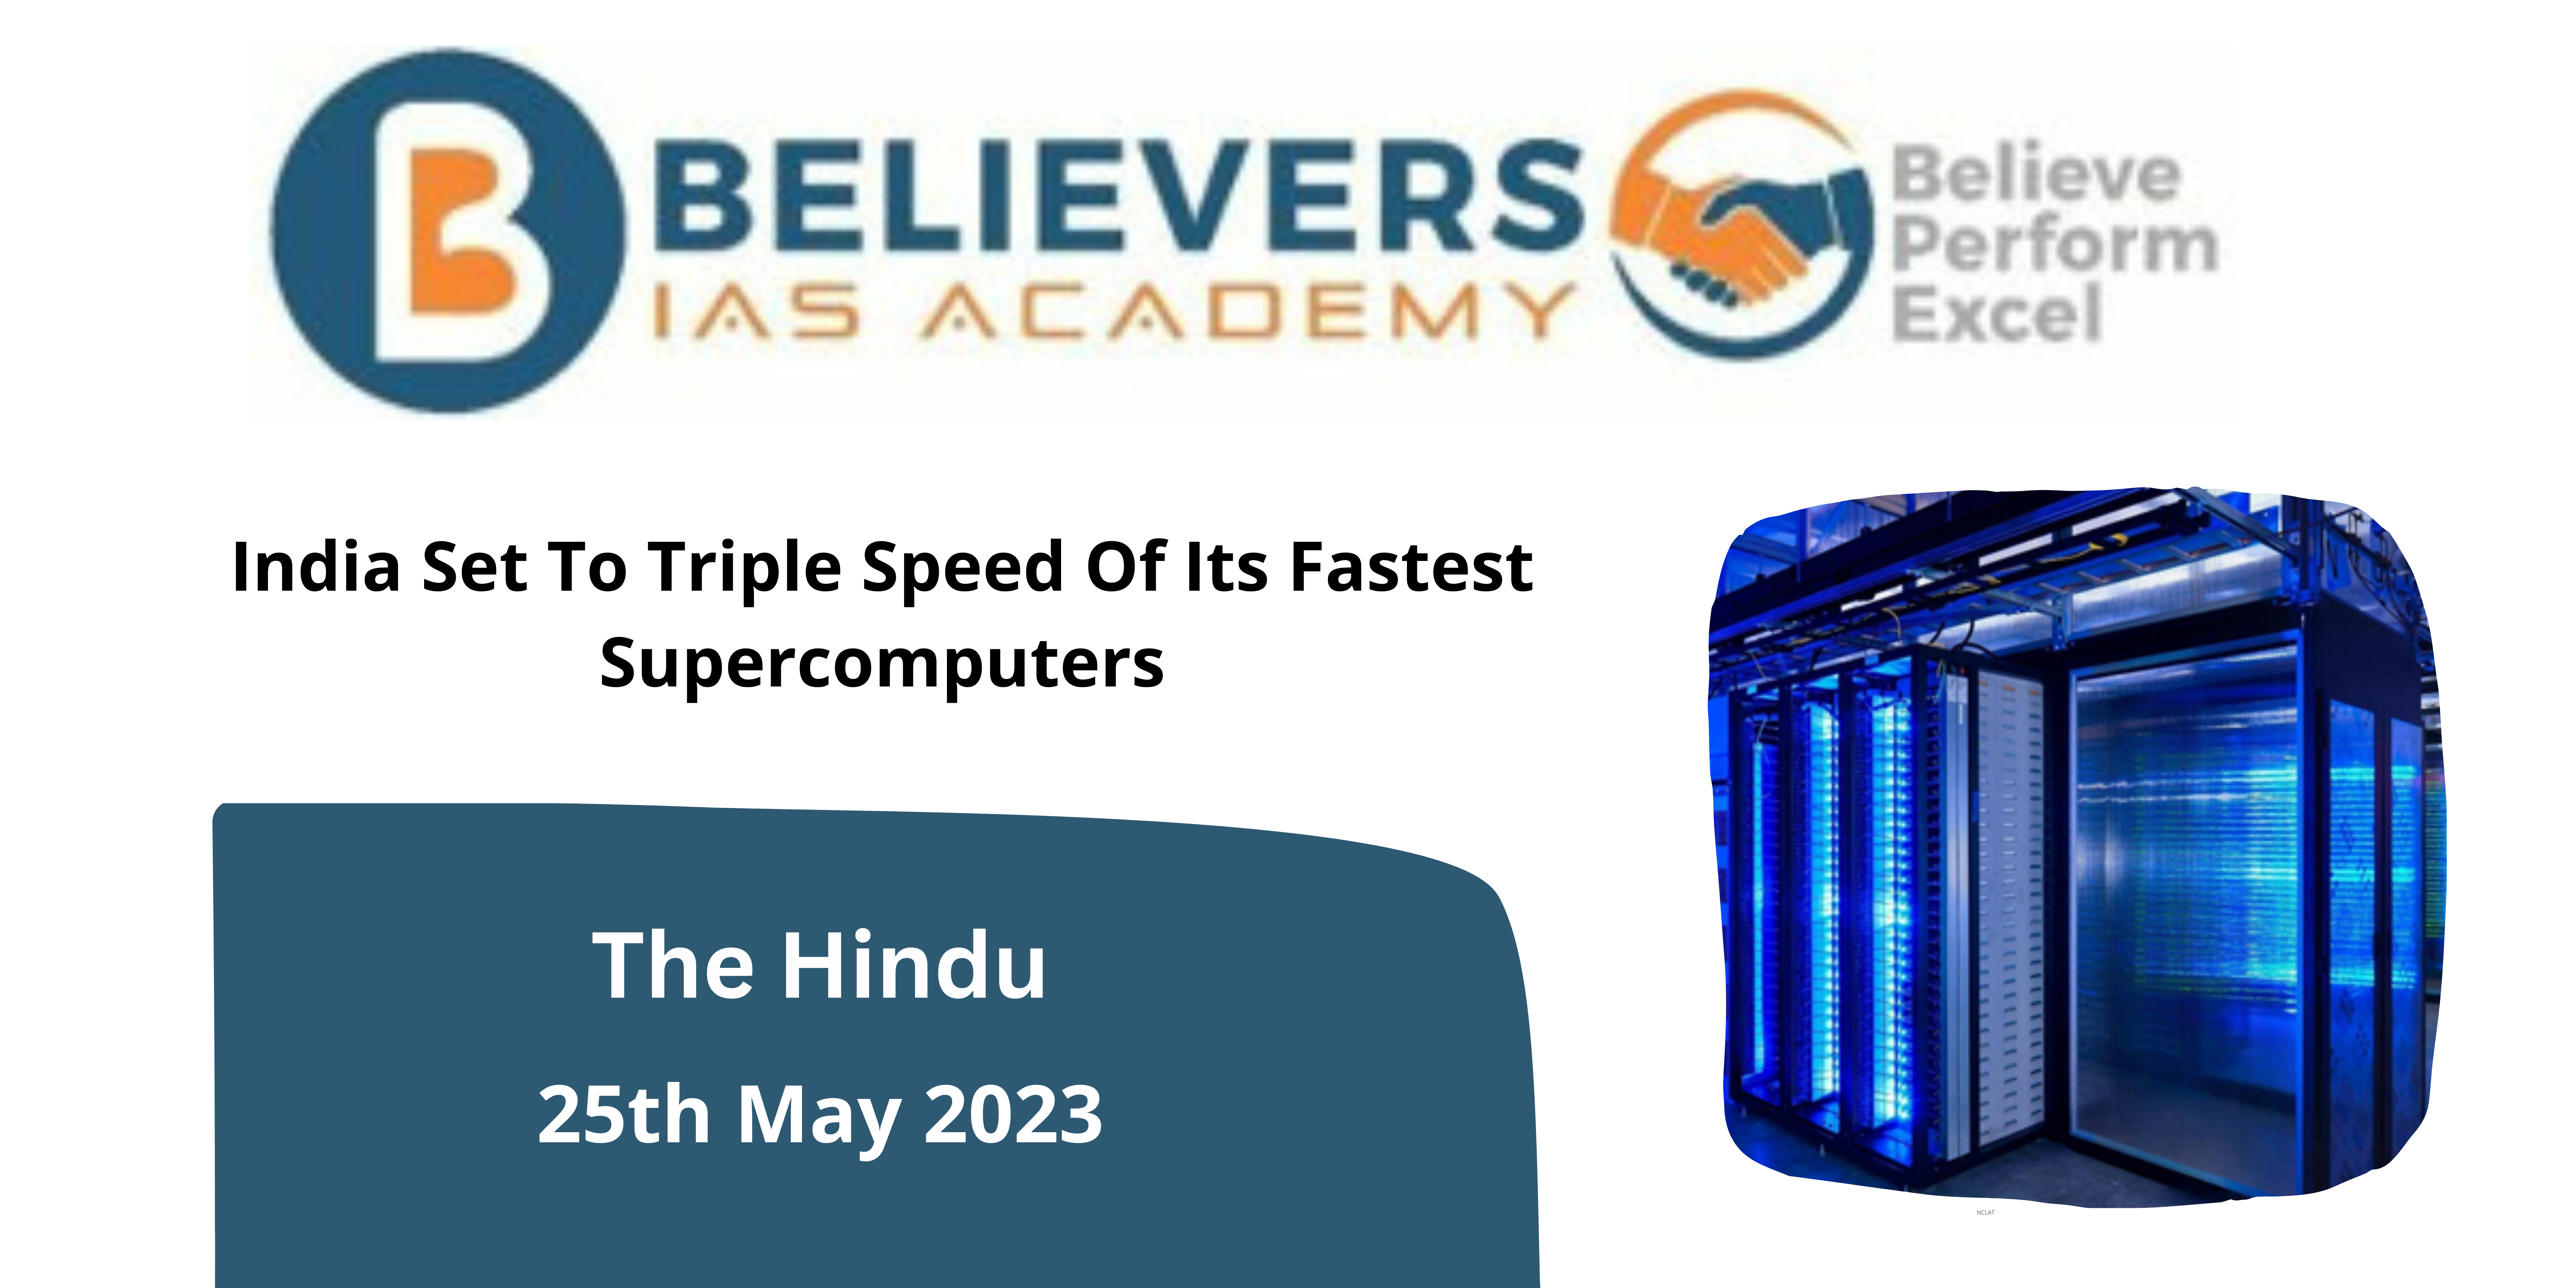 India Set To Triple Speed Of Its Fastest Supercomputers